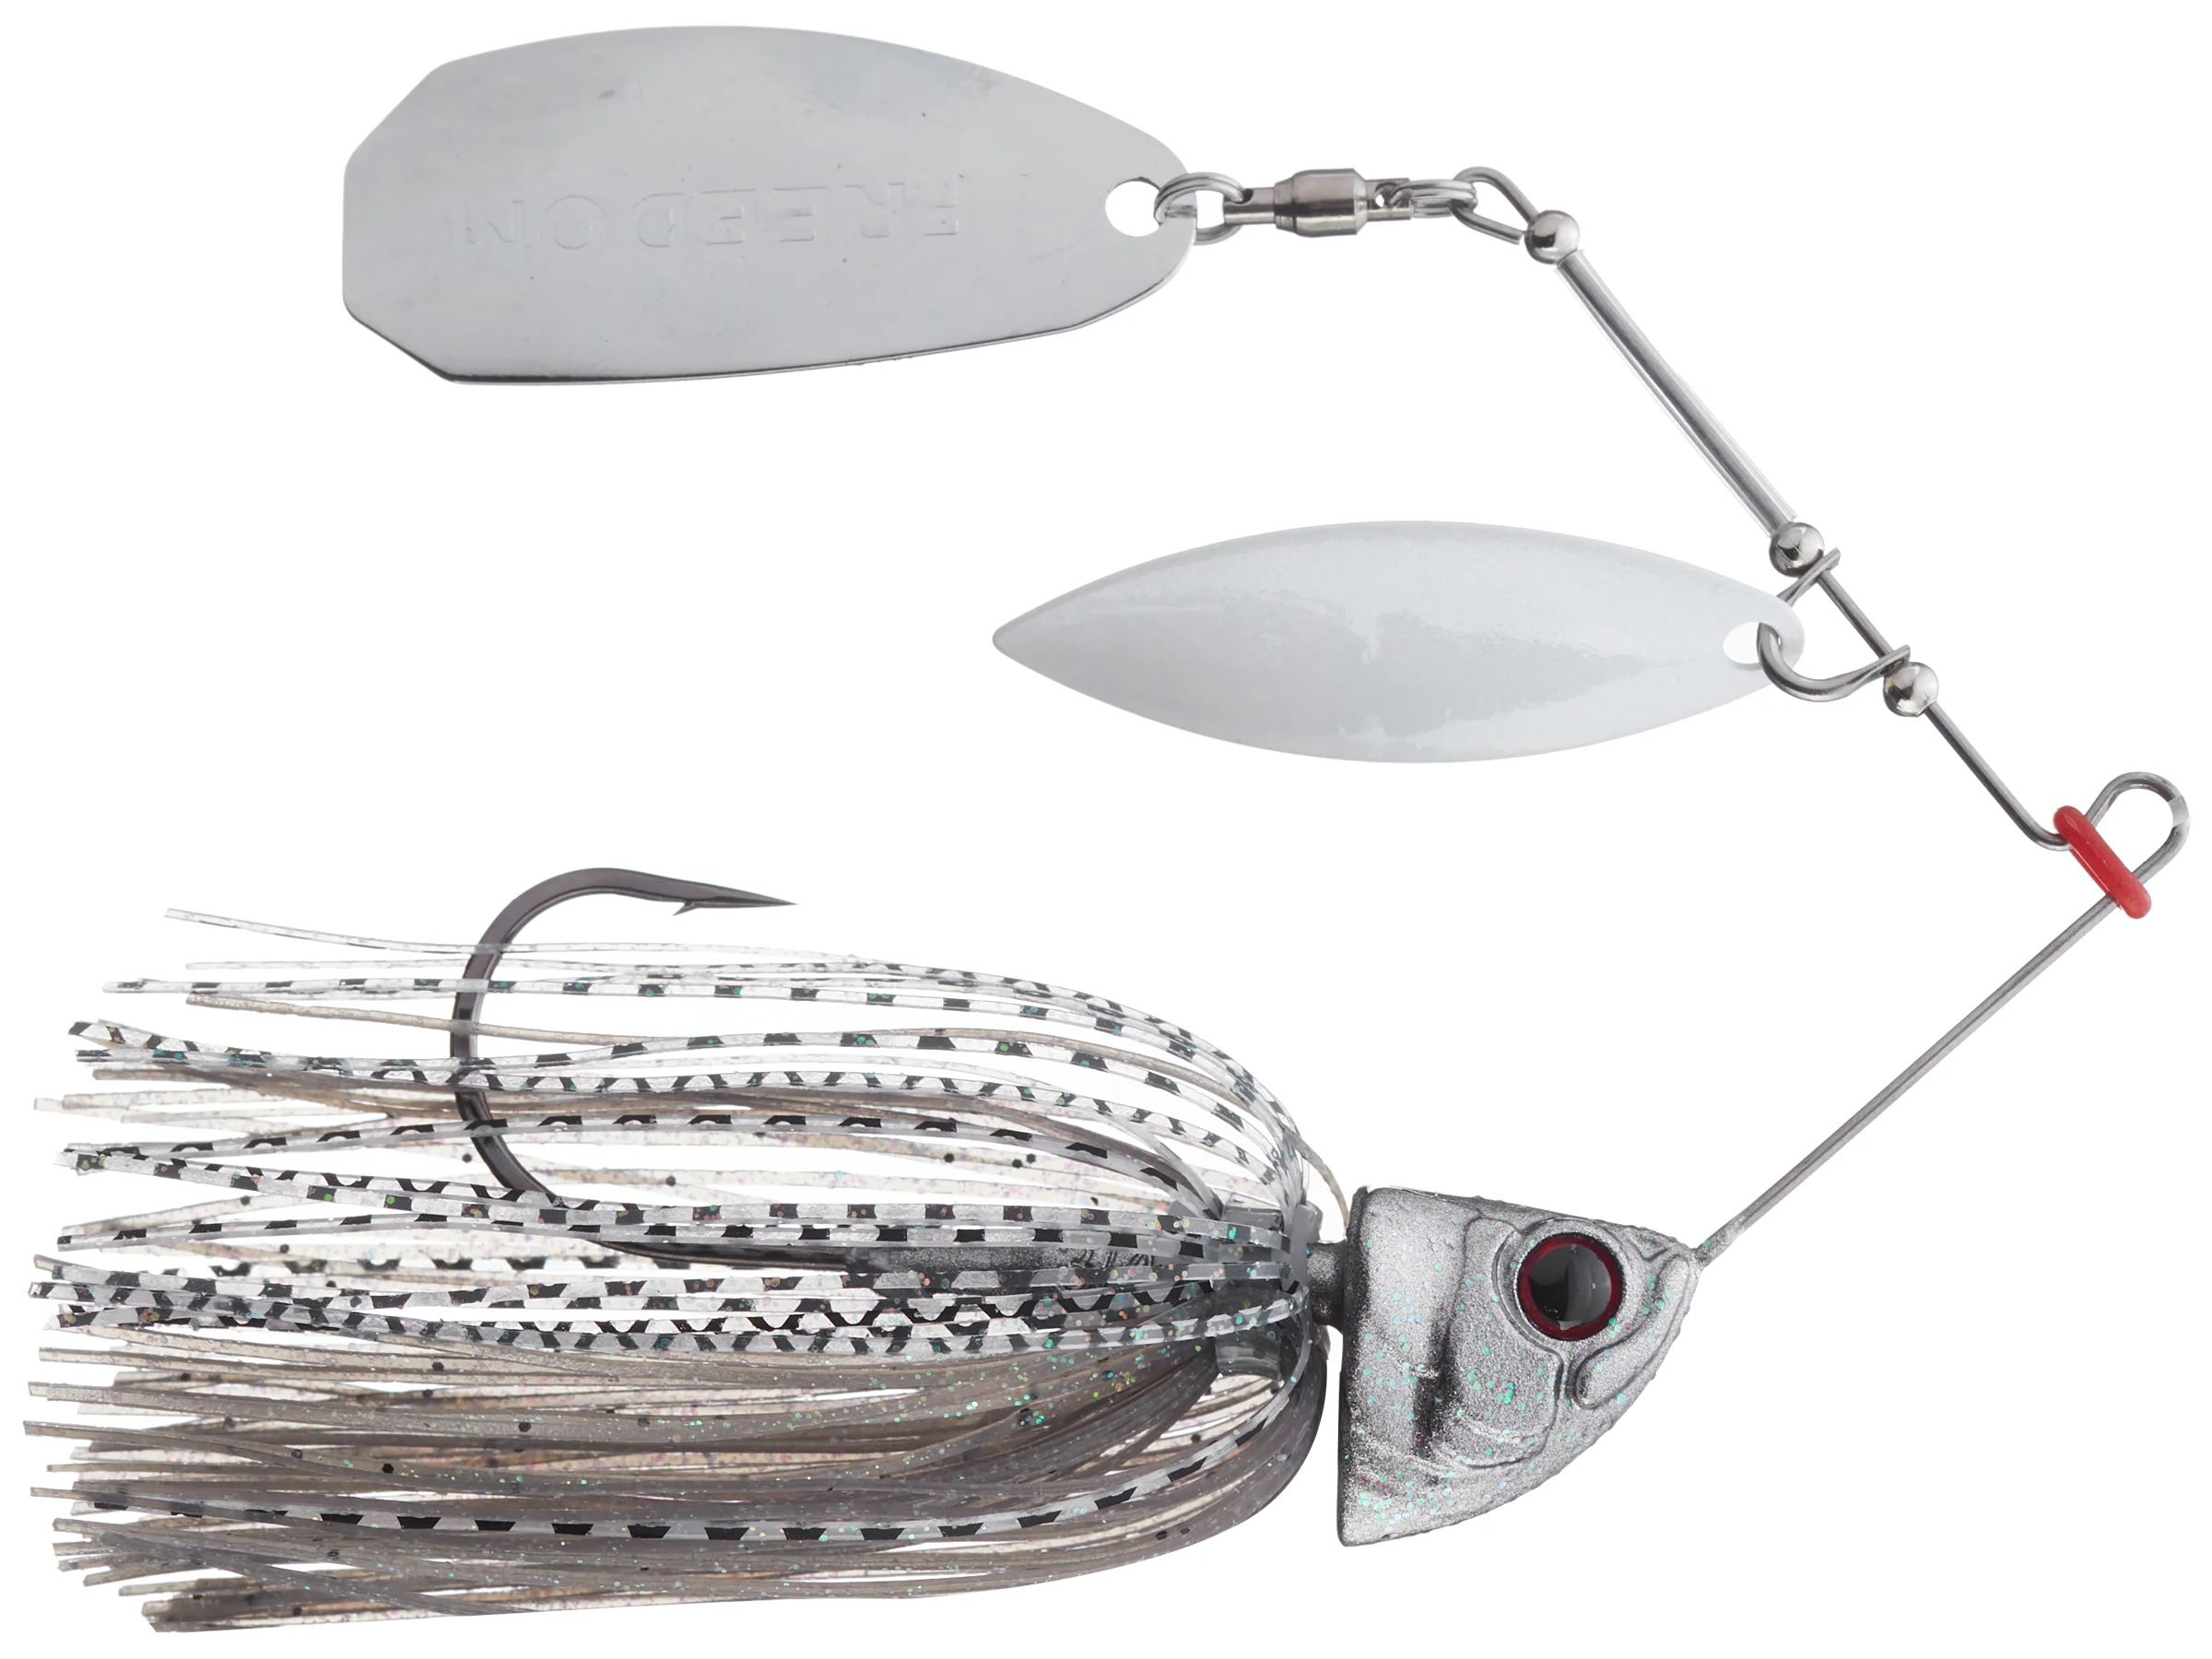 Esche-metalliche-wire-baits-spinnerbait-netbait-freedom-tackle-freedom-speed-freak-compact-52111-mouse-lurefishing-planet-negozio-pesca-online-fishing-shop